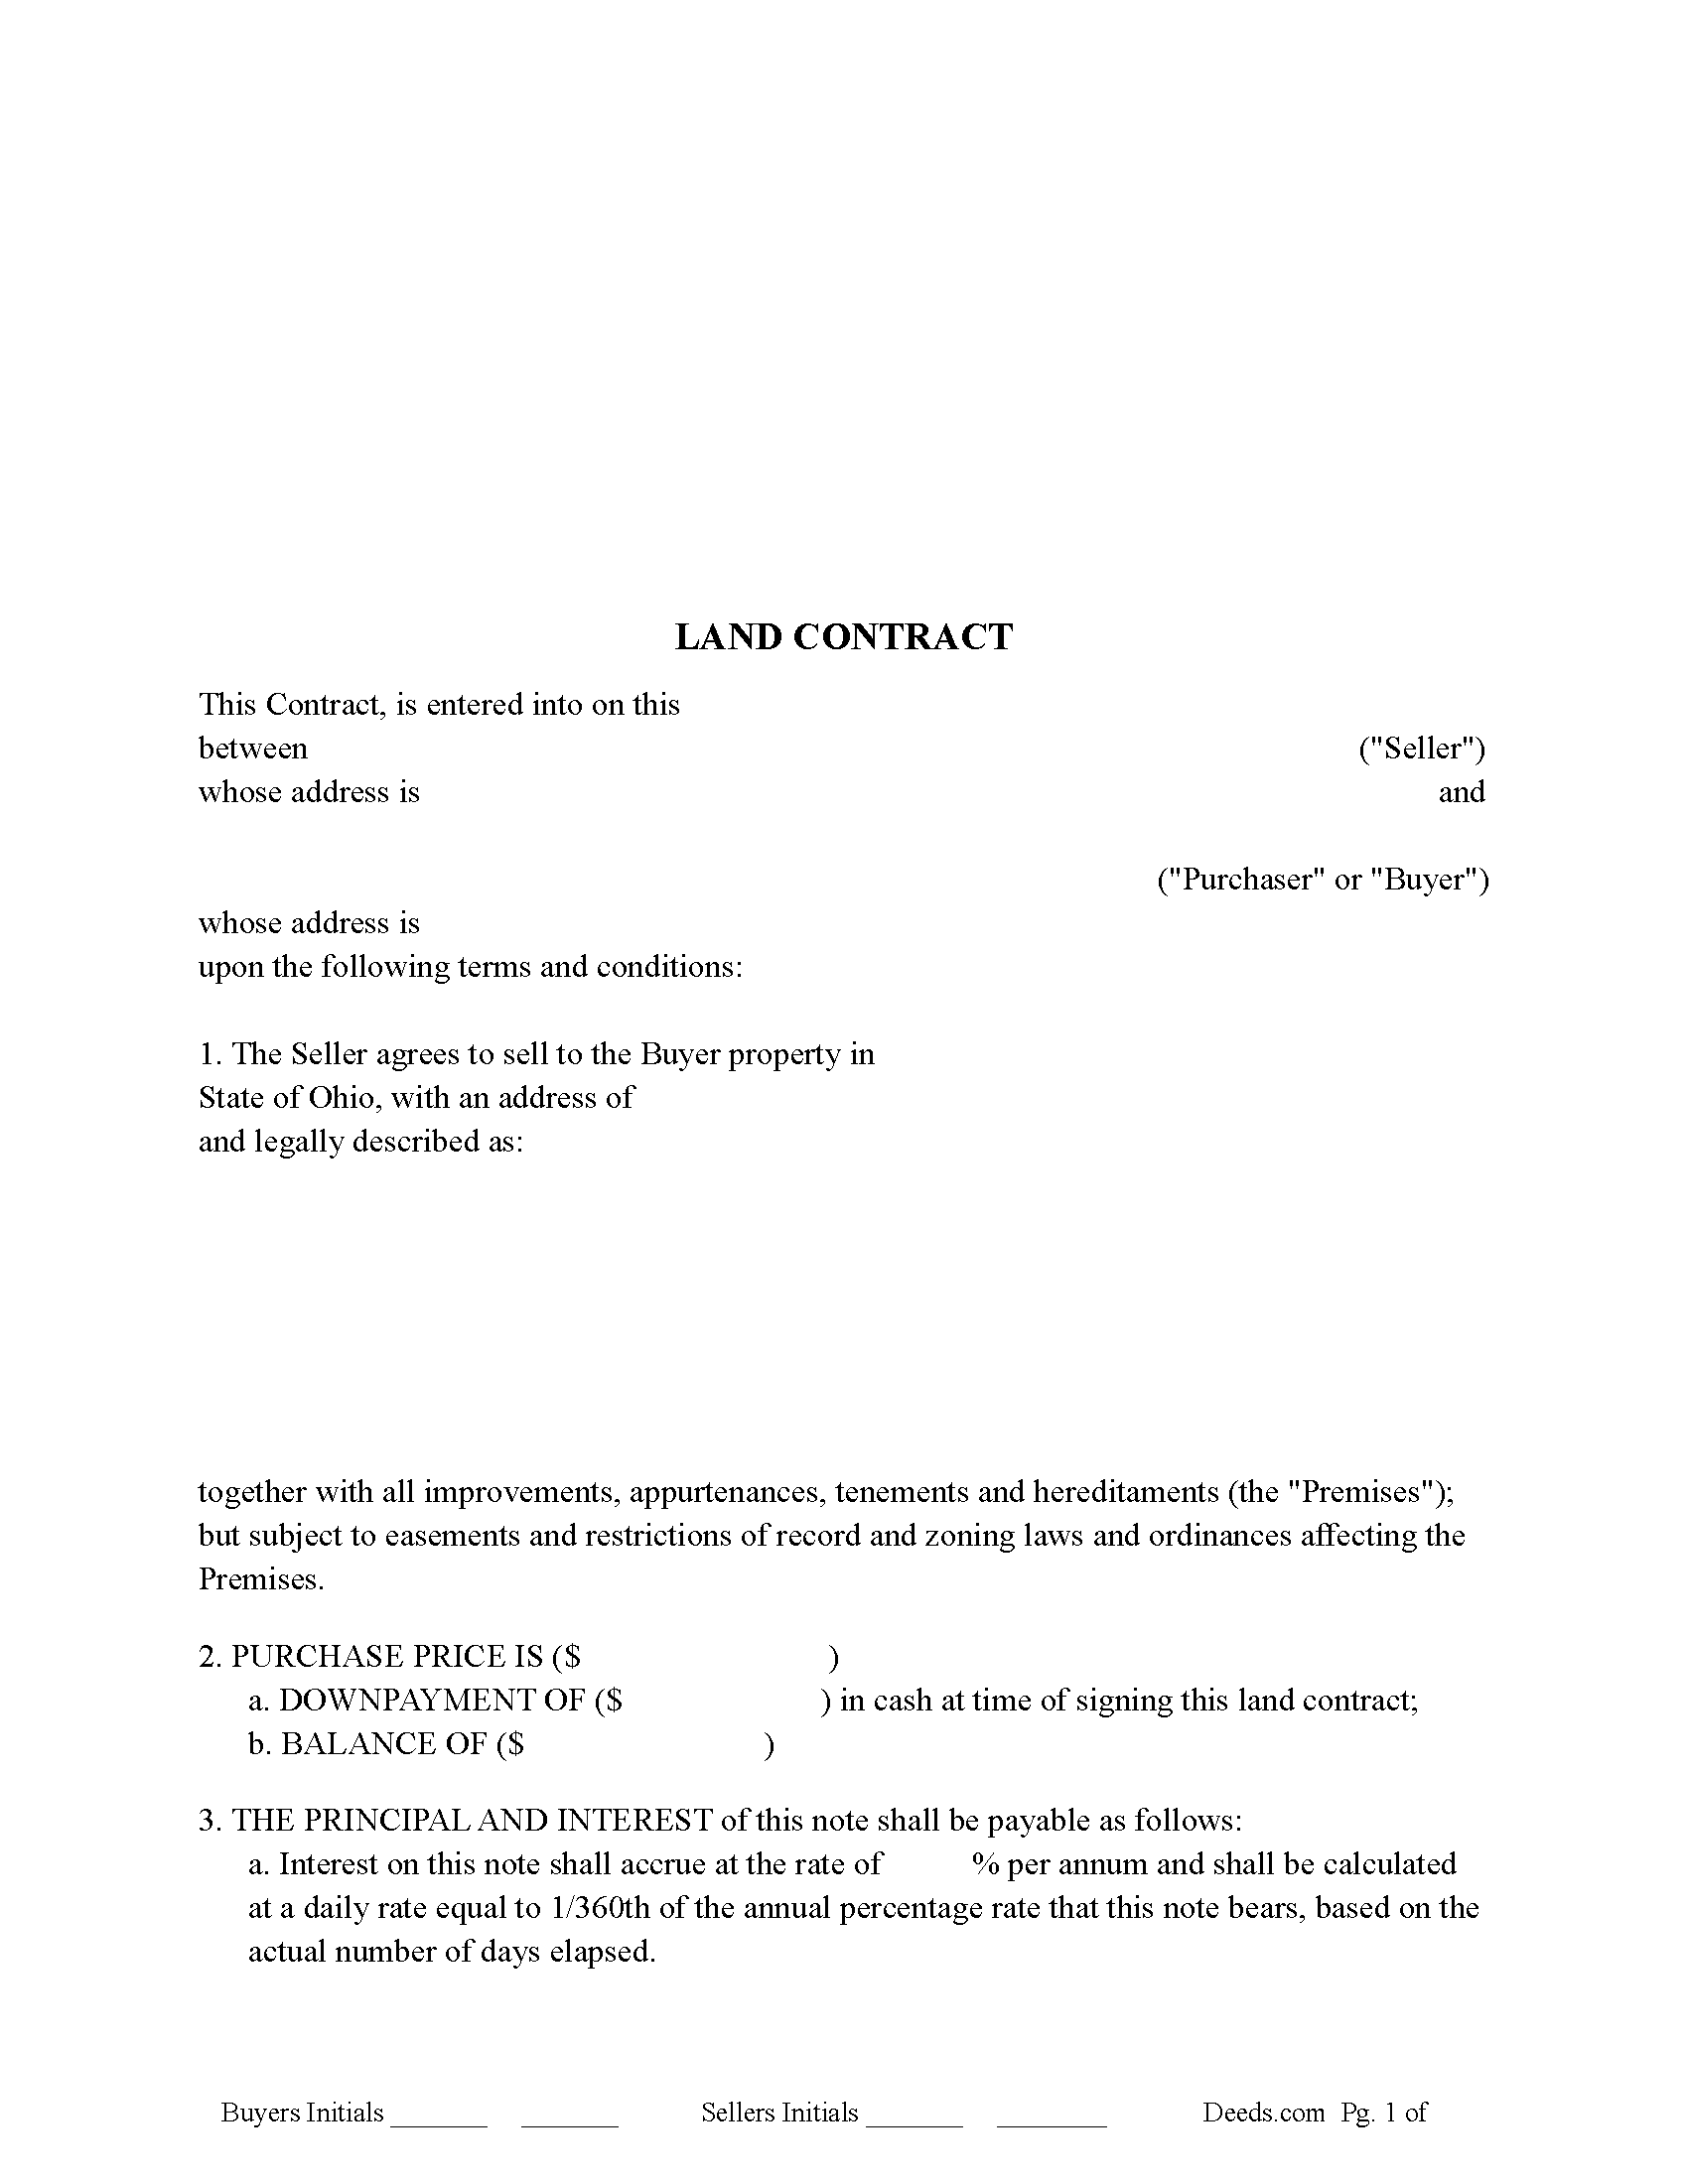 Portage County Land Contract Form